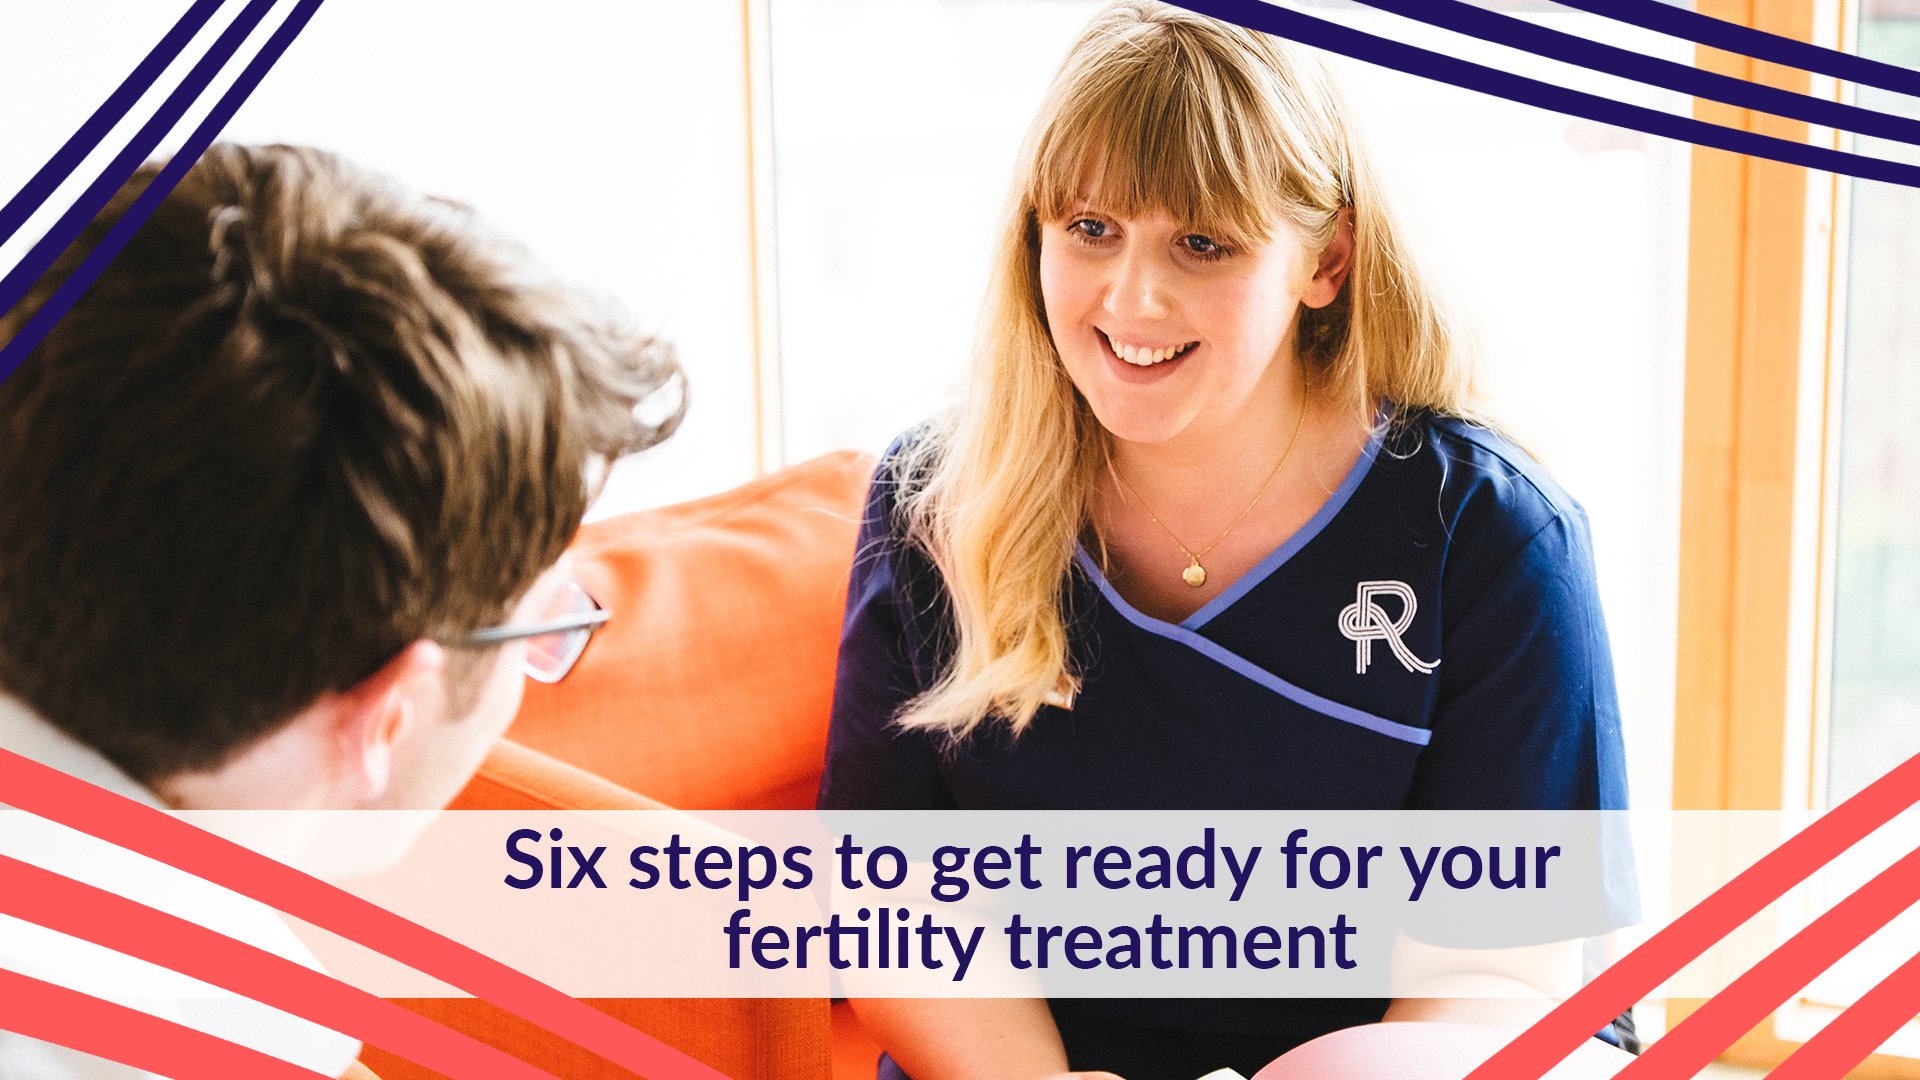 Six steps to get ready for your fertility treatment